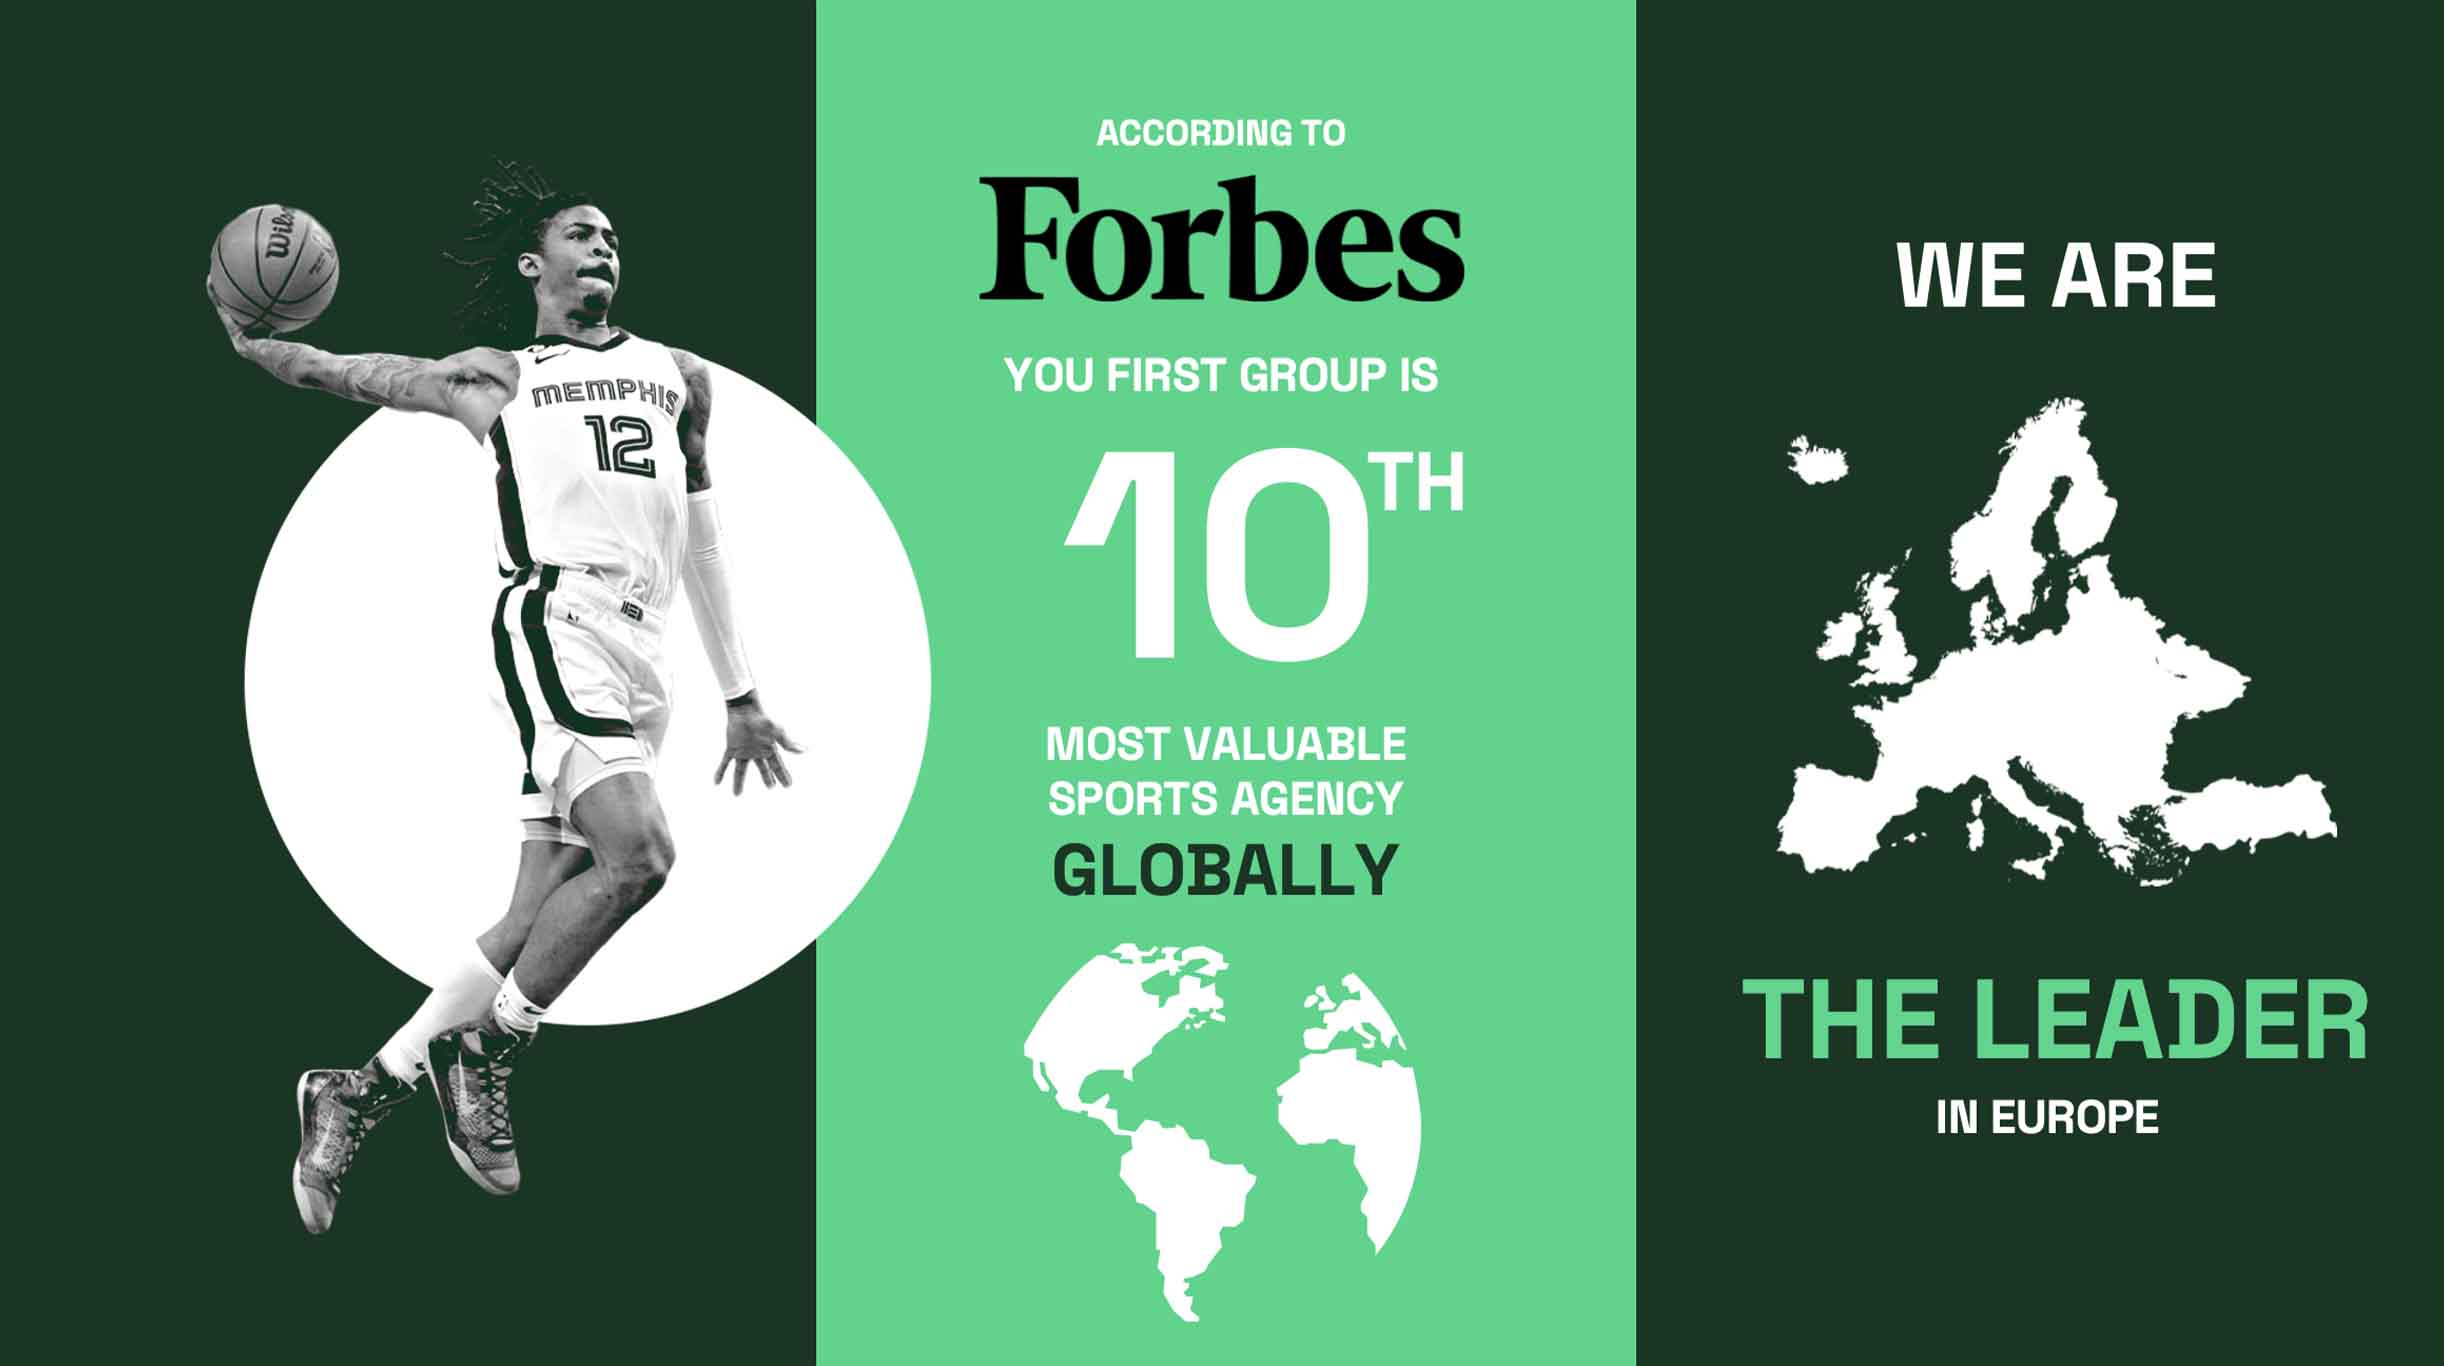 Graphic that shows that, according to Forbes, You First is the 10th most valuable sports agency in the world.